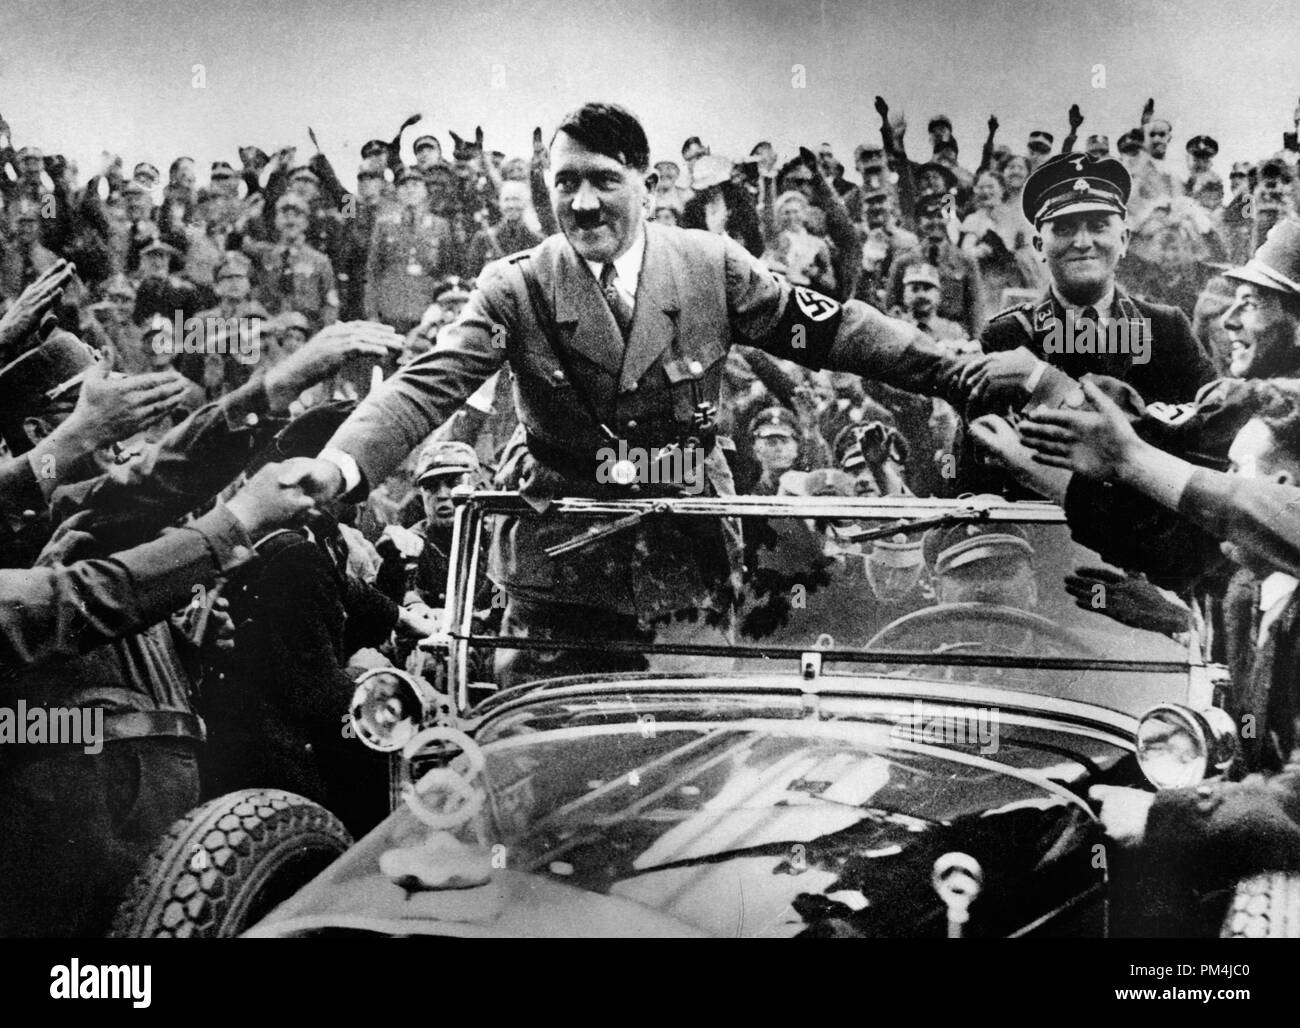 Adolf Hitler, Chancellor of Germany, is welcomed by supporters at Nuremberg, circa 1933   File Reference # 1003 661THA Stock Photo